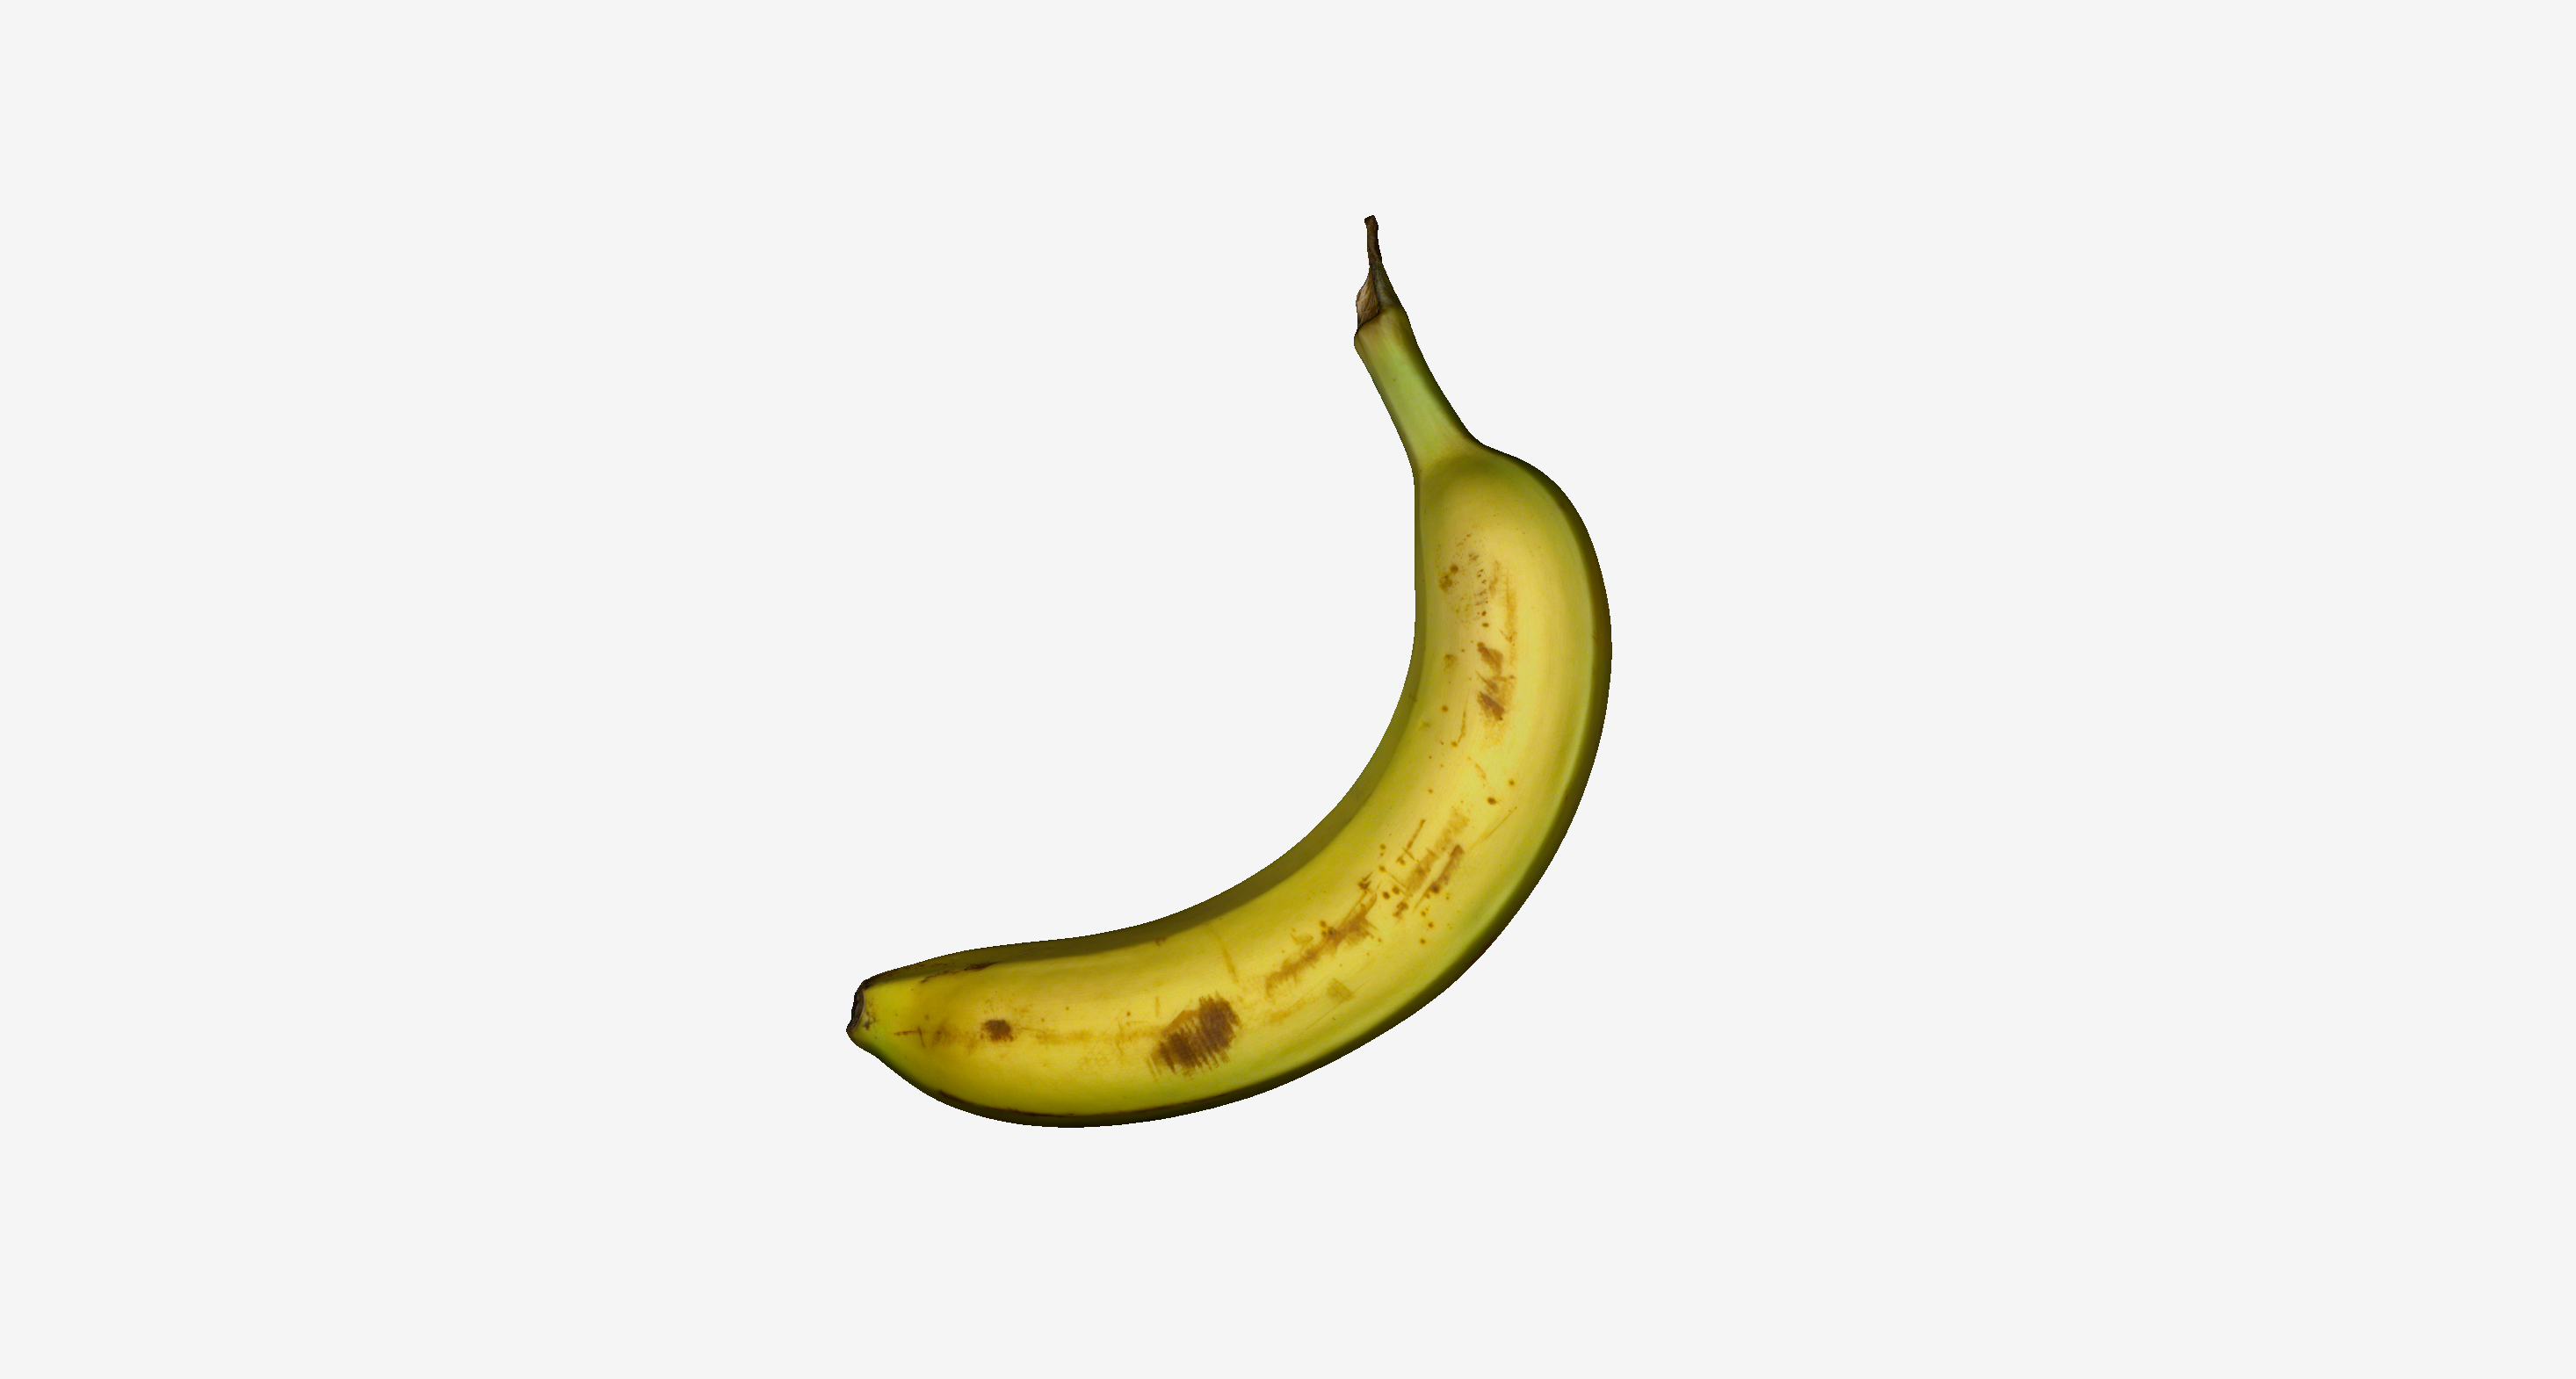 The 3D mesh of the banana with the full colour texture map applied